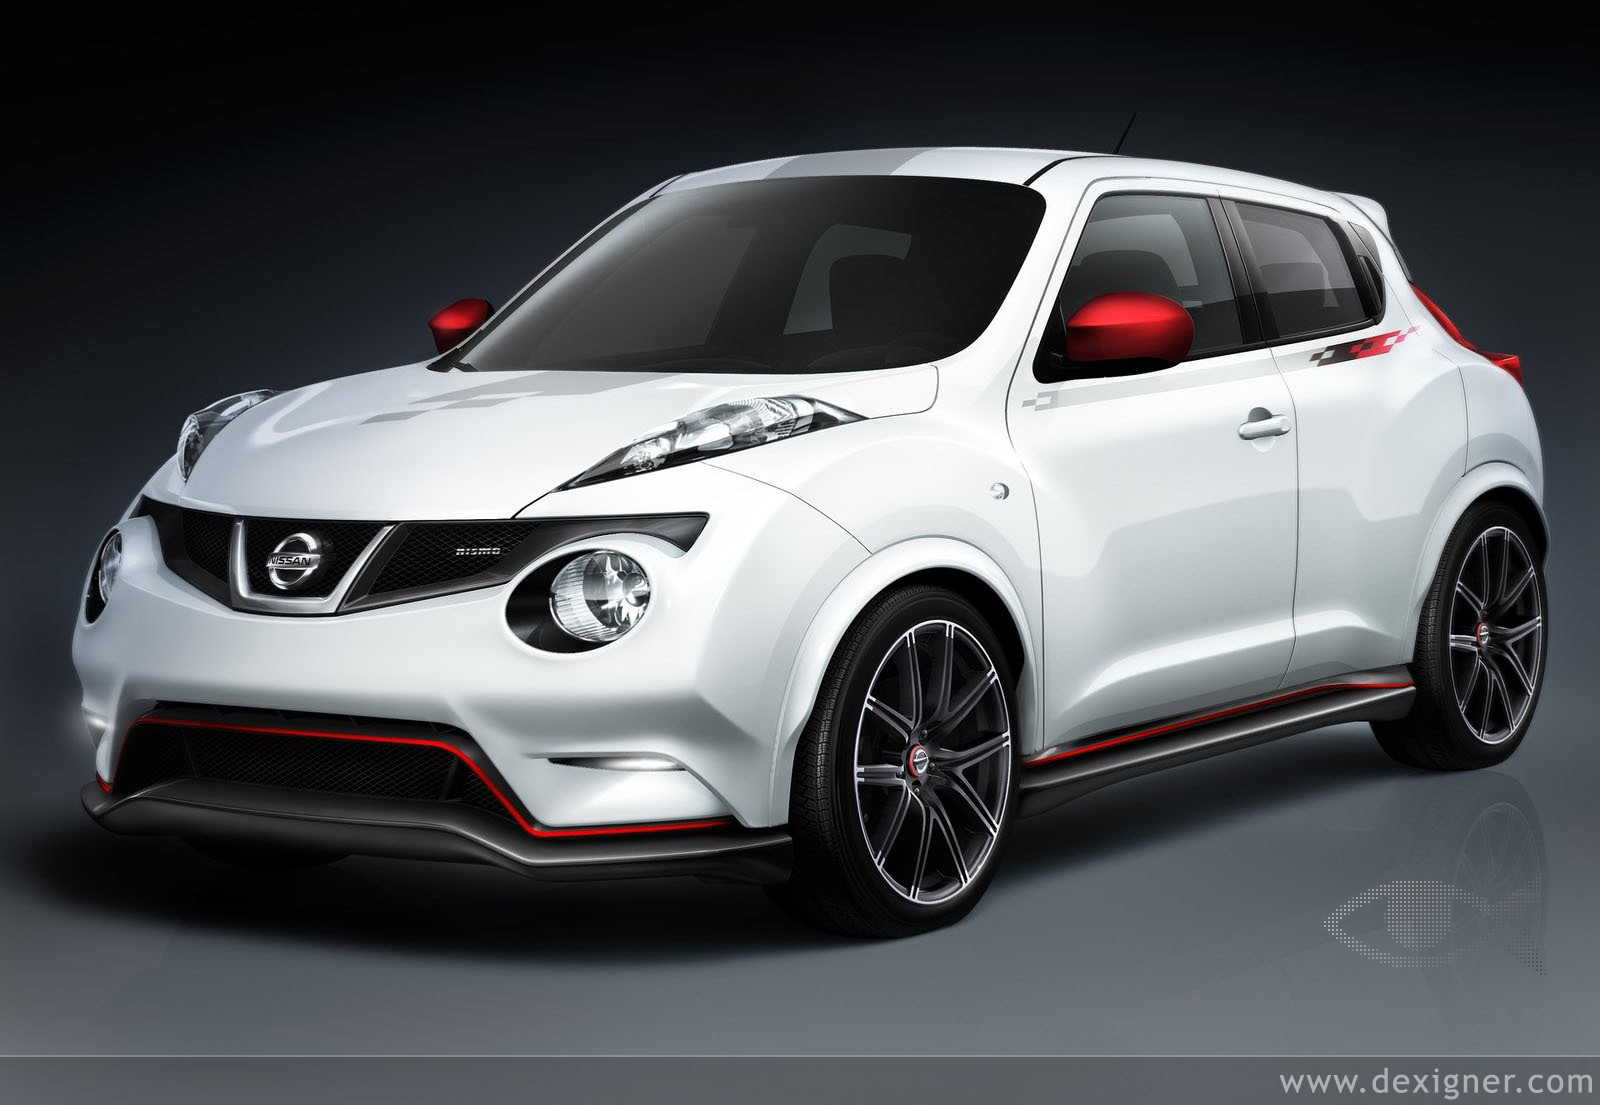 Nissan Juke Nismo Concept 01. Aimed at a car-loving audience looking for a